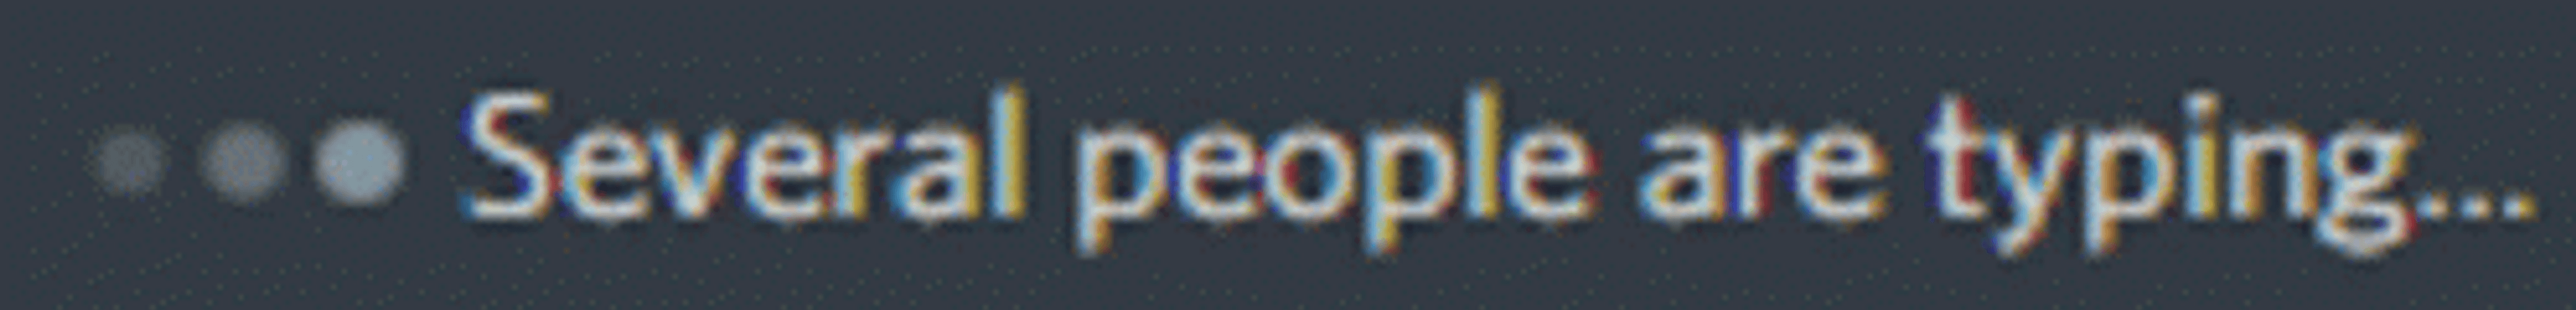 Discord People Typing